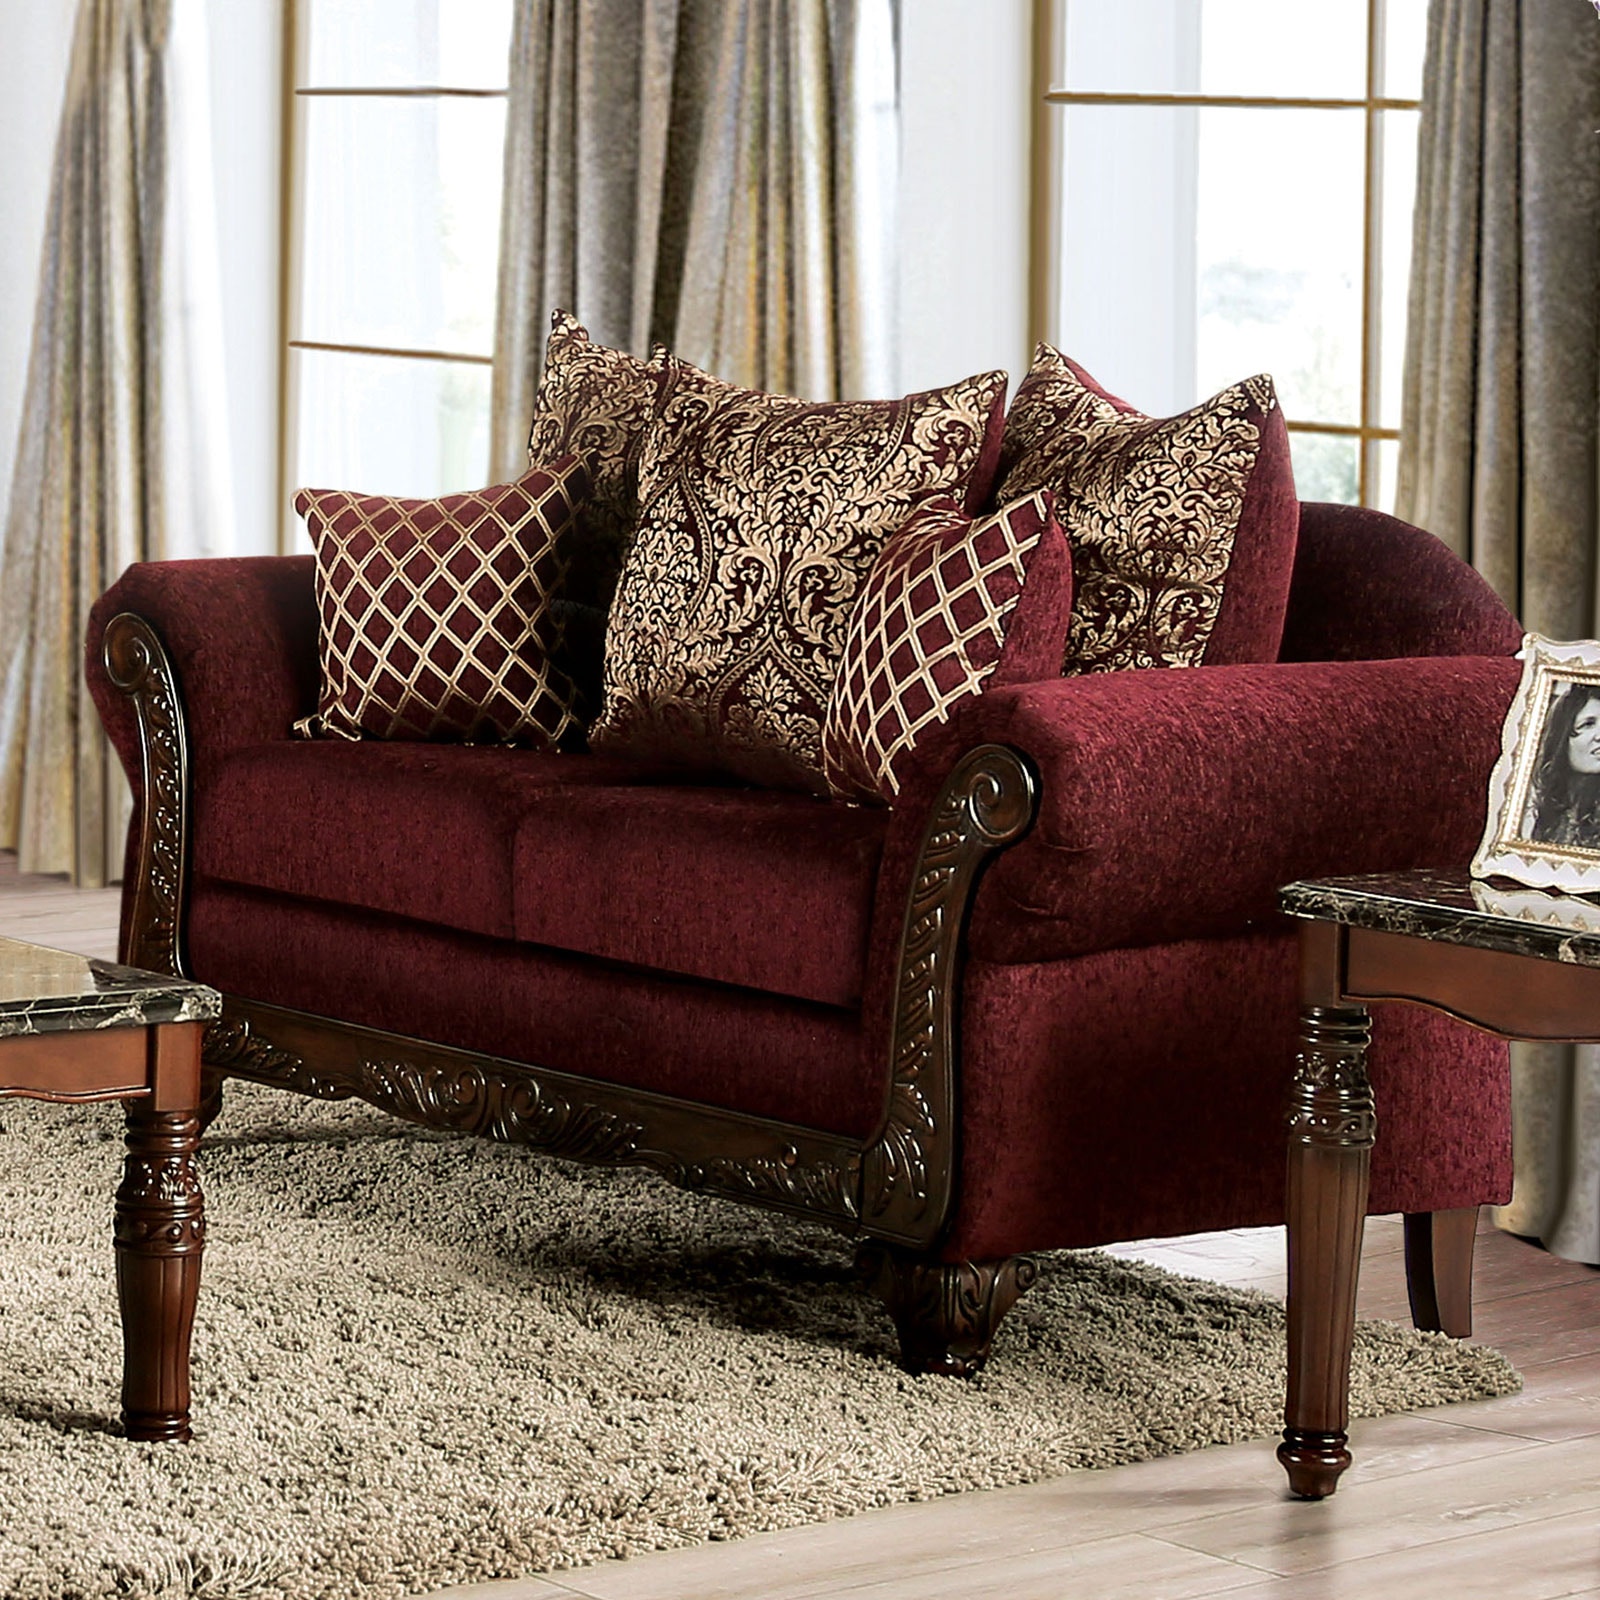 Furniture of America Living Room Love Seat SM2227-LV - Anna's Home